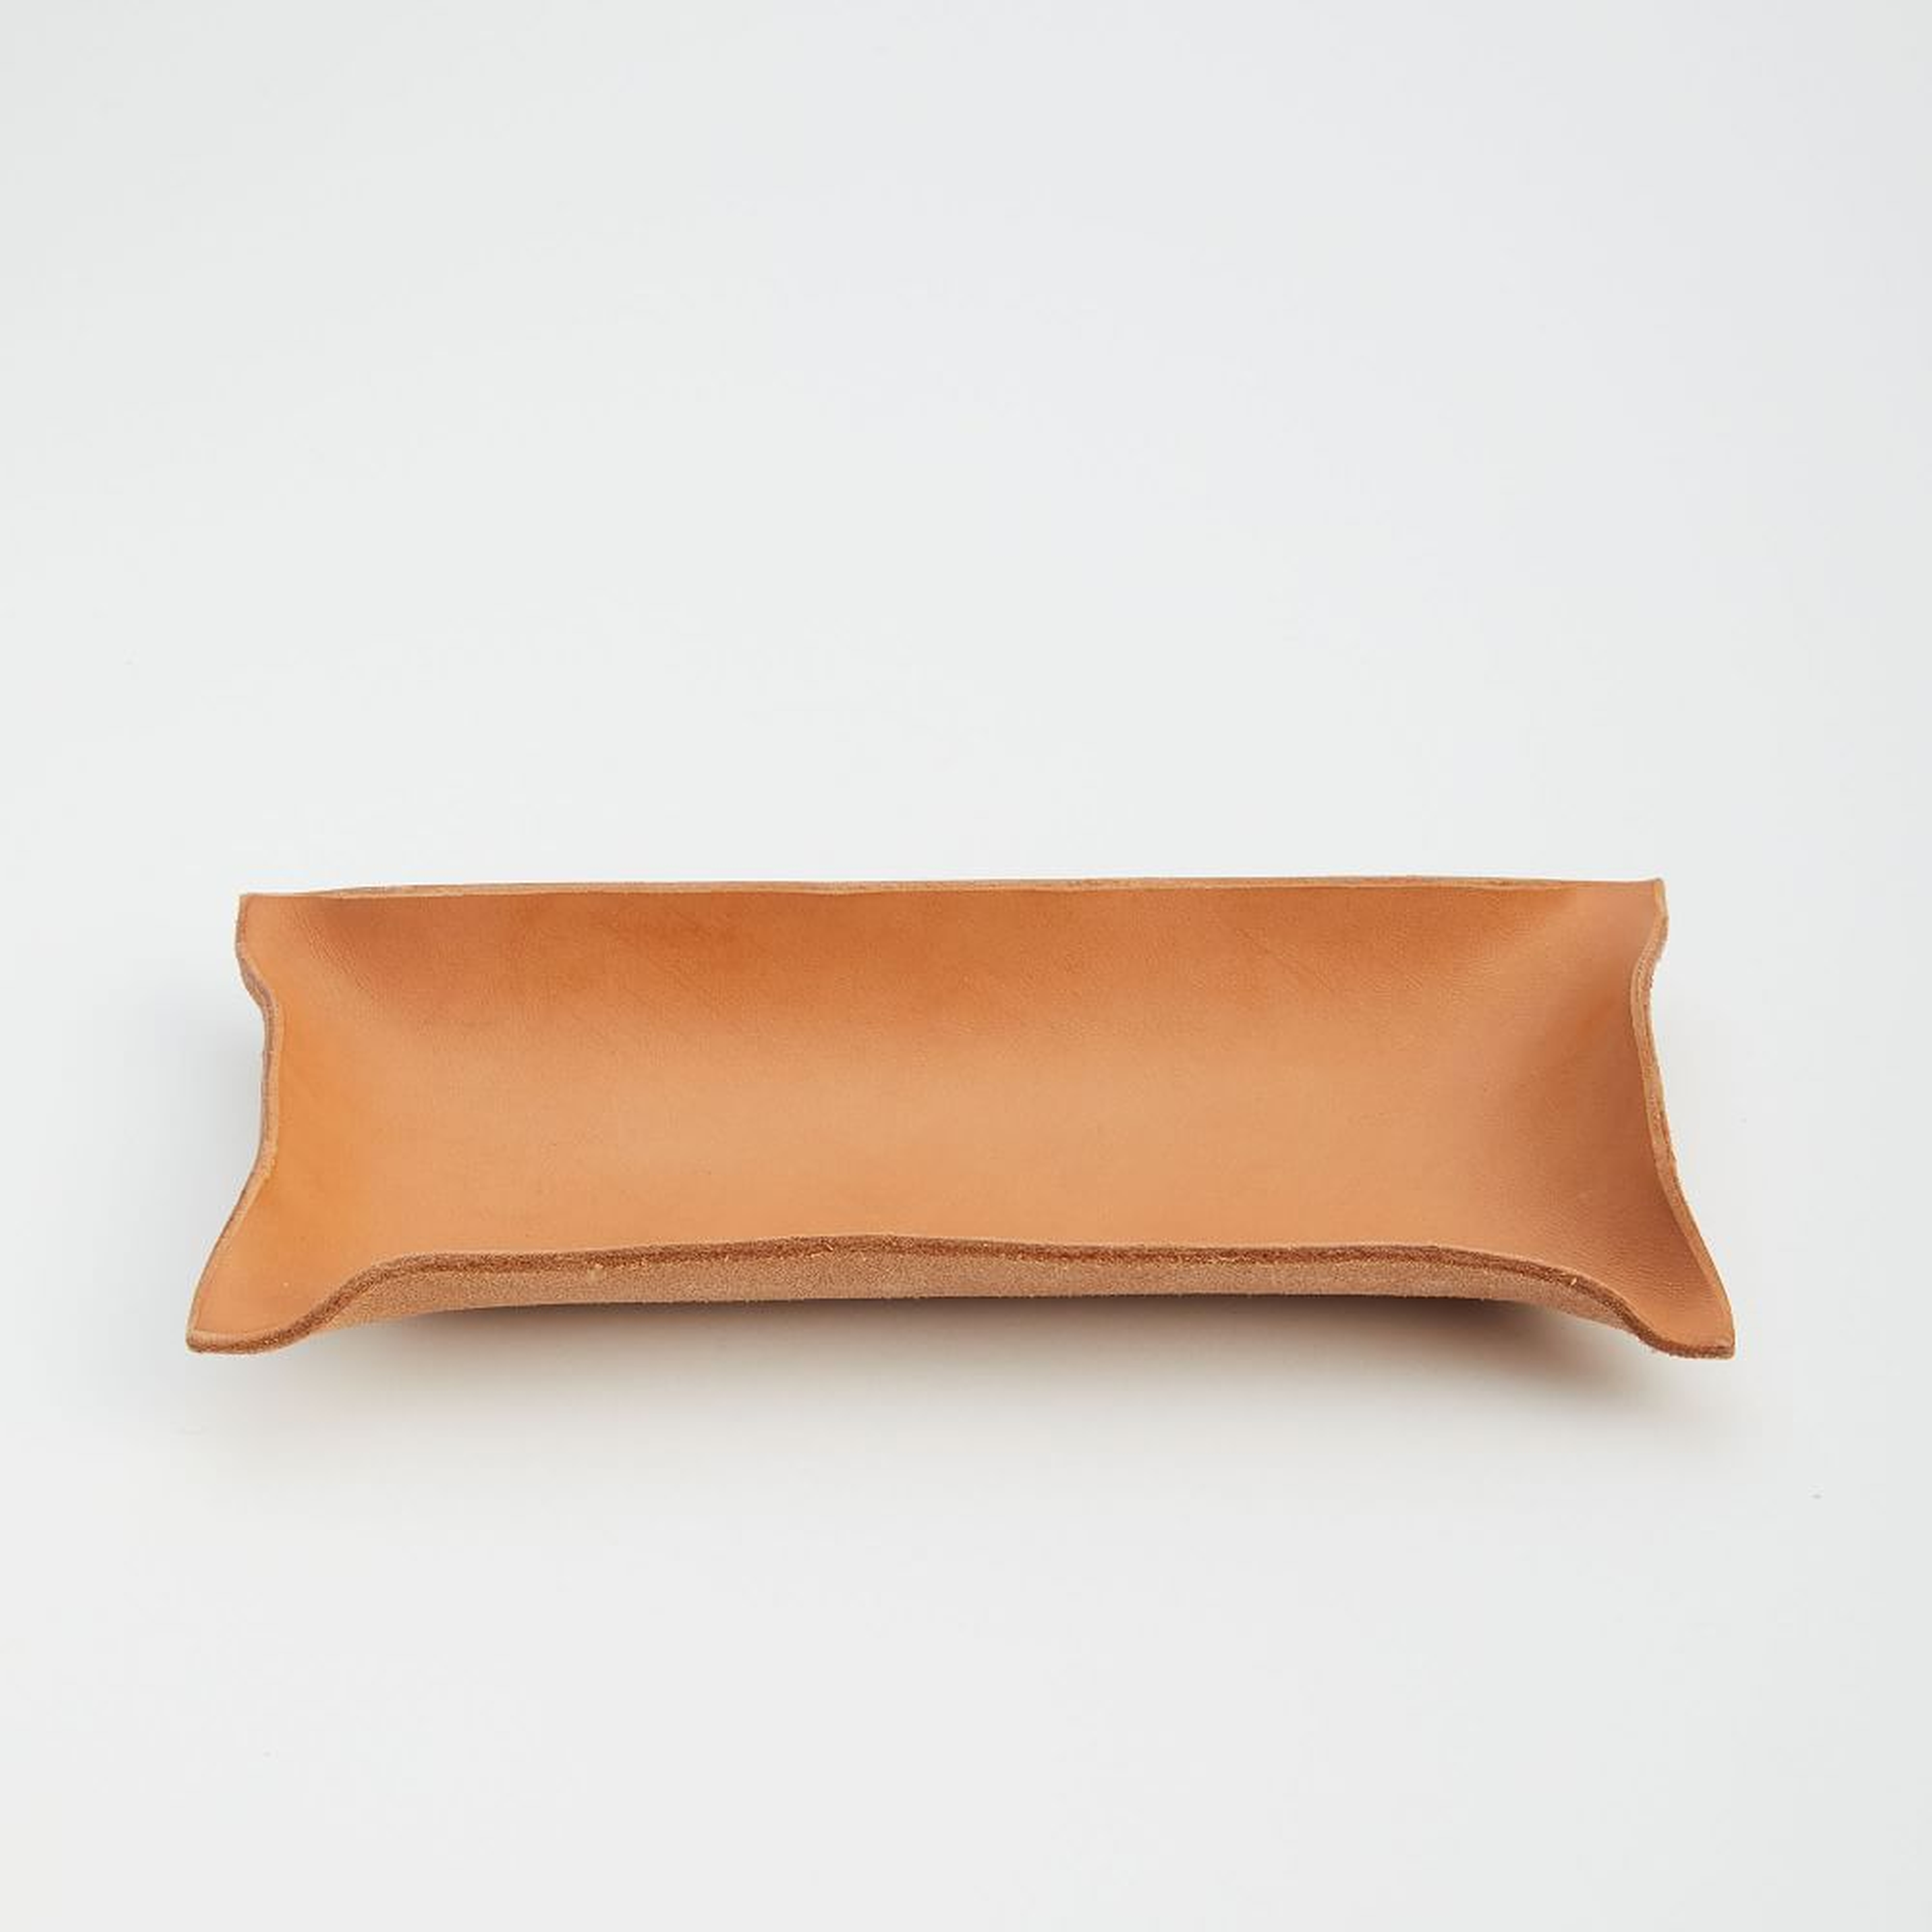 Made Solid Hand-Shaped Leather Tray, 4.5"x9" - West Elm